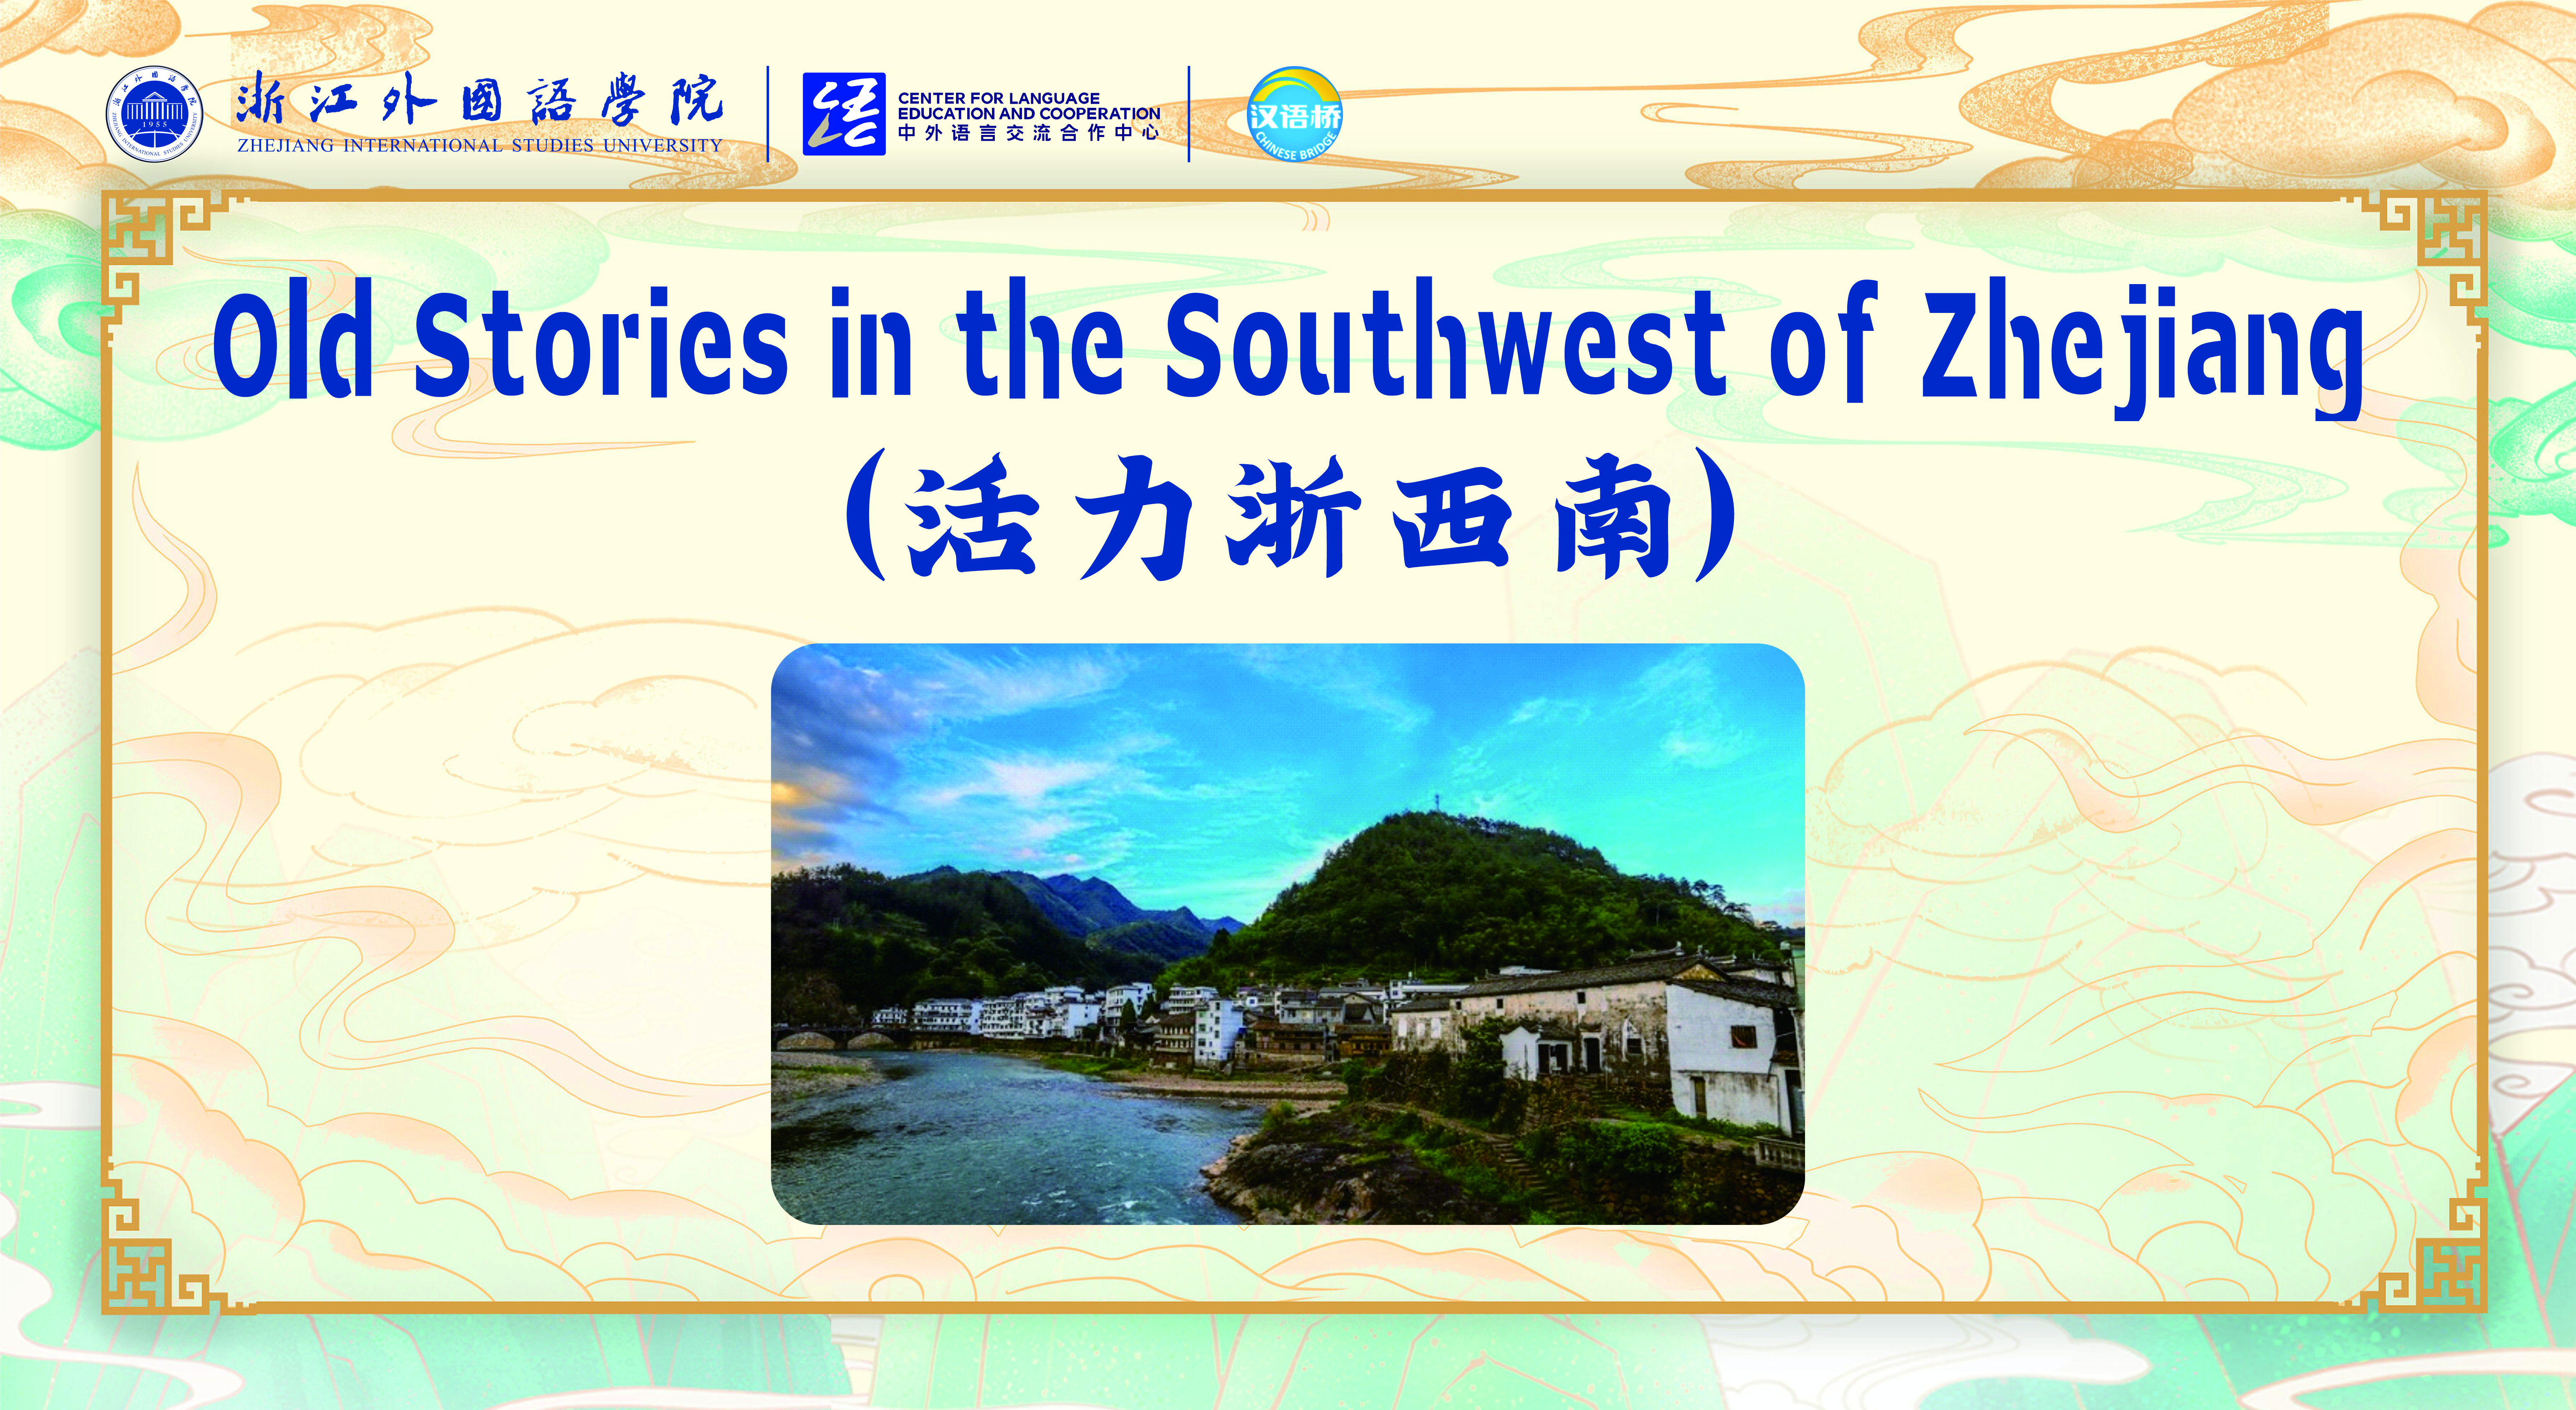 Old Stories in the Southwest of Zhejiang